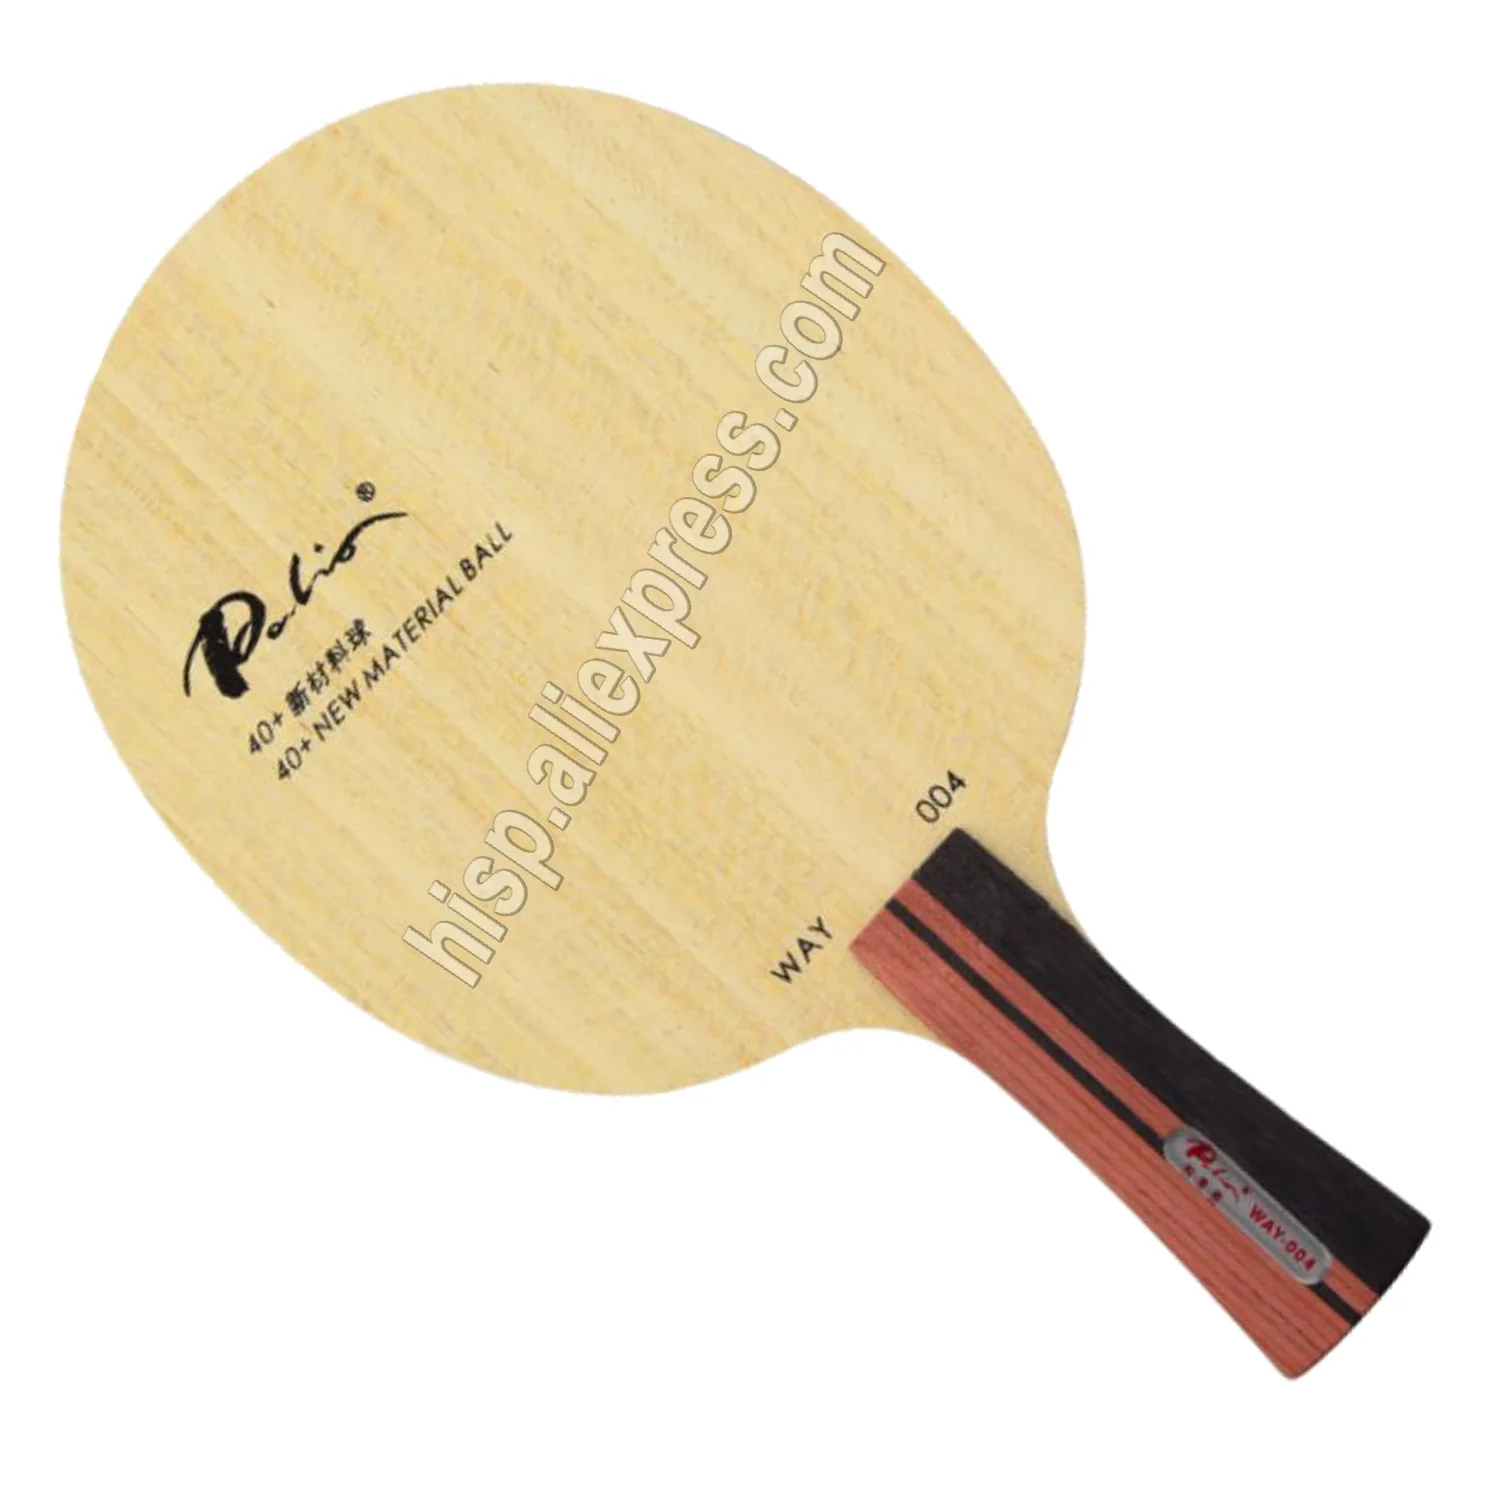 

Palio official way004 way 004 table tennis blade pure wood for 40+ new material table tennis racket sports racquet sports